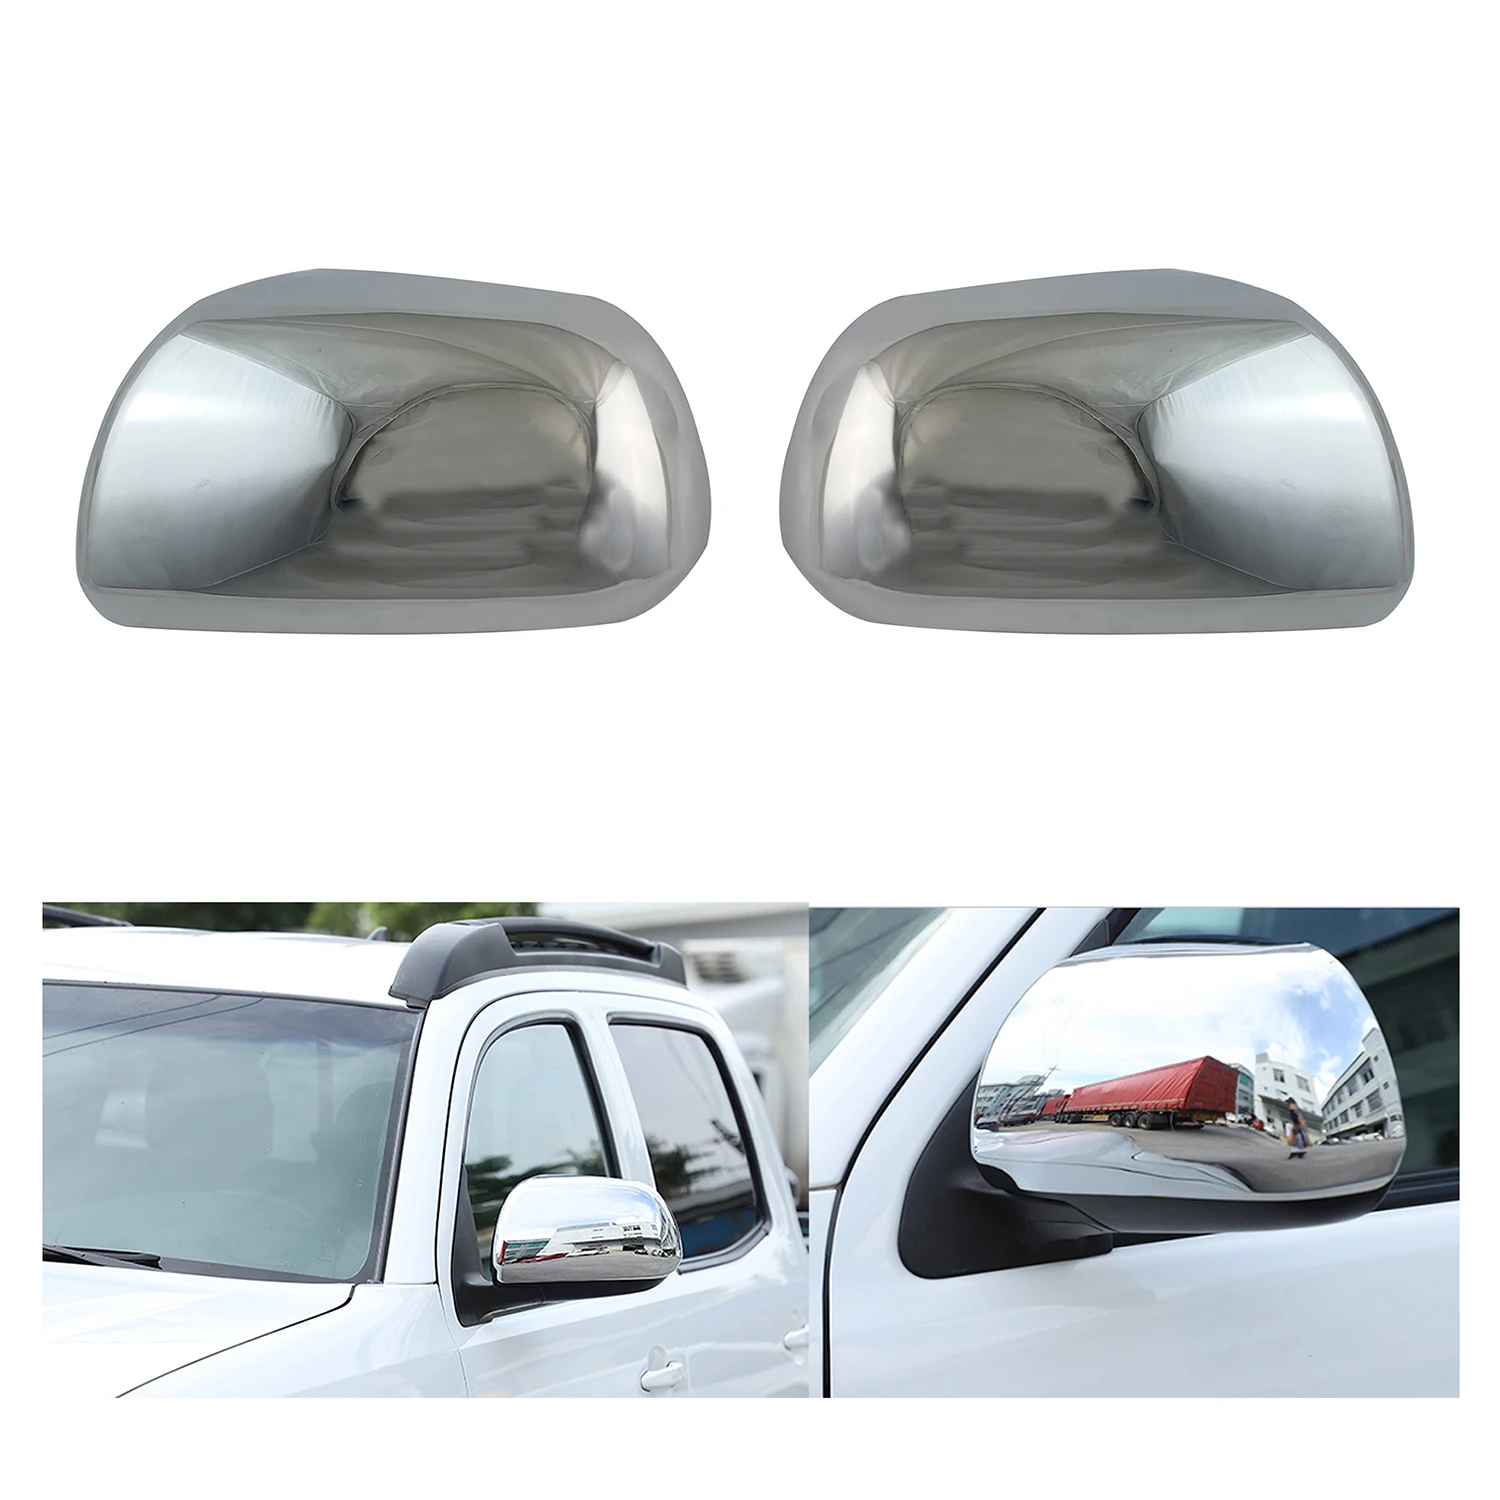 2015 2016 2017 2018 2019 For Toyota Sienna Rav4 Previa Alphard Chrome Rearview Car Accessories Plated Door Mirror Cover Trim